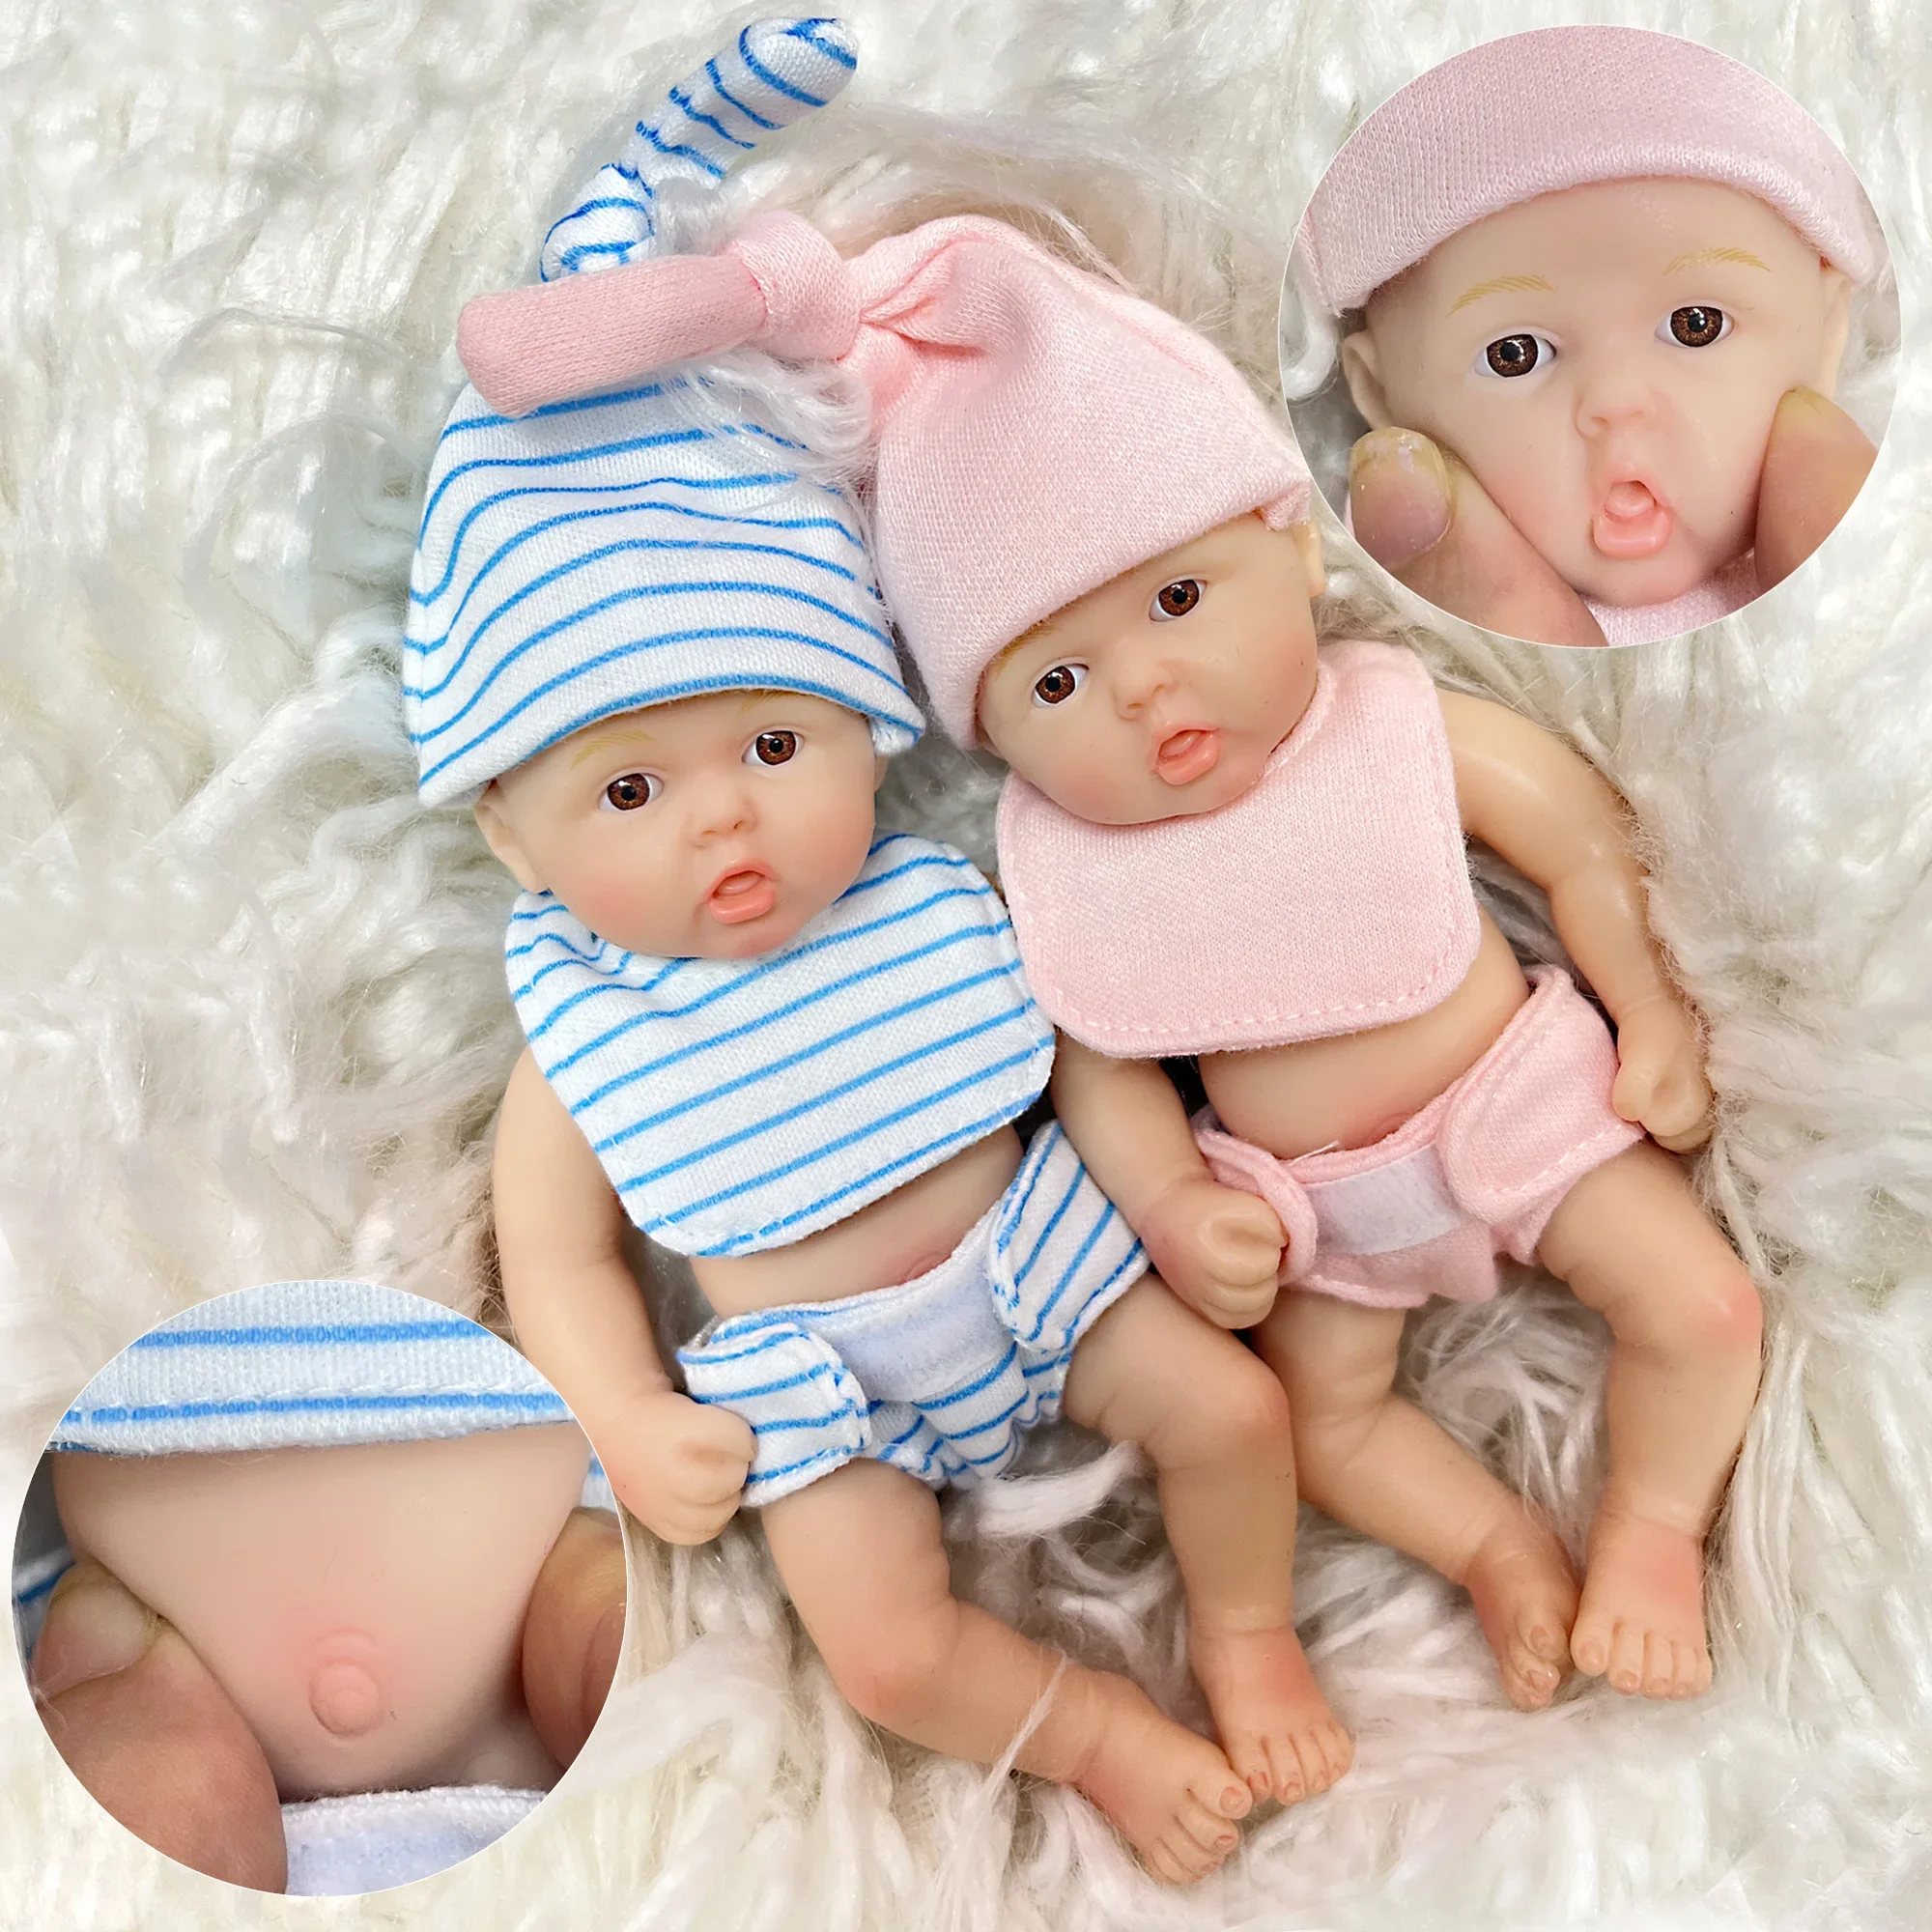 6Inch /15CM Mini Adorable Whole Solid Silicone Reborn Doll Painted Realistic Handmade Reborn Dolls For Kid's Gift Reborn double wheelie bin shed 140x75x121 cm painted solid pinewood